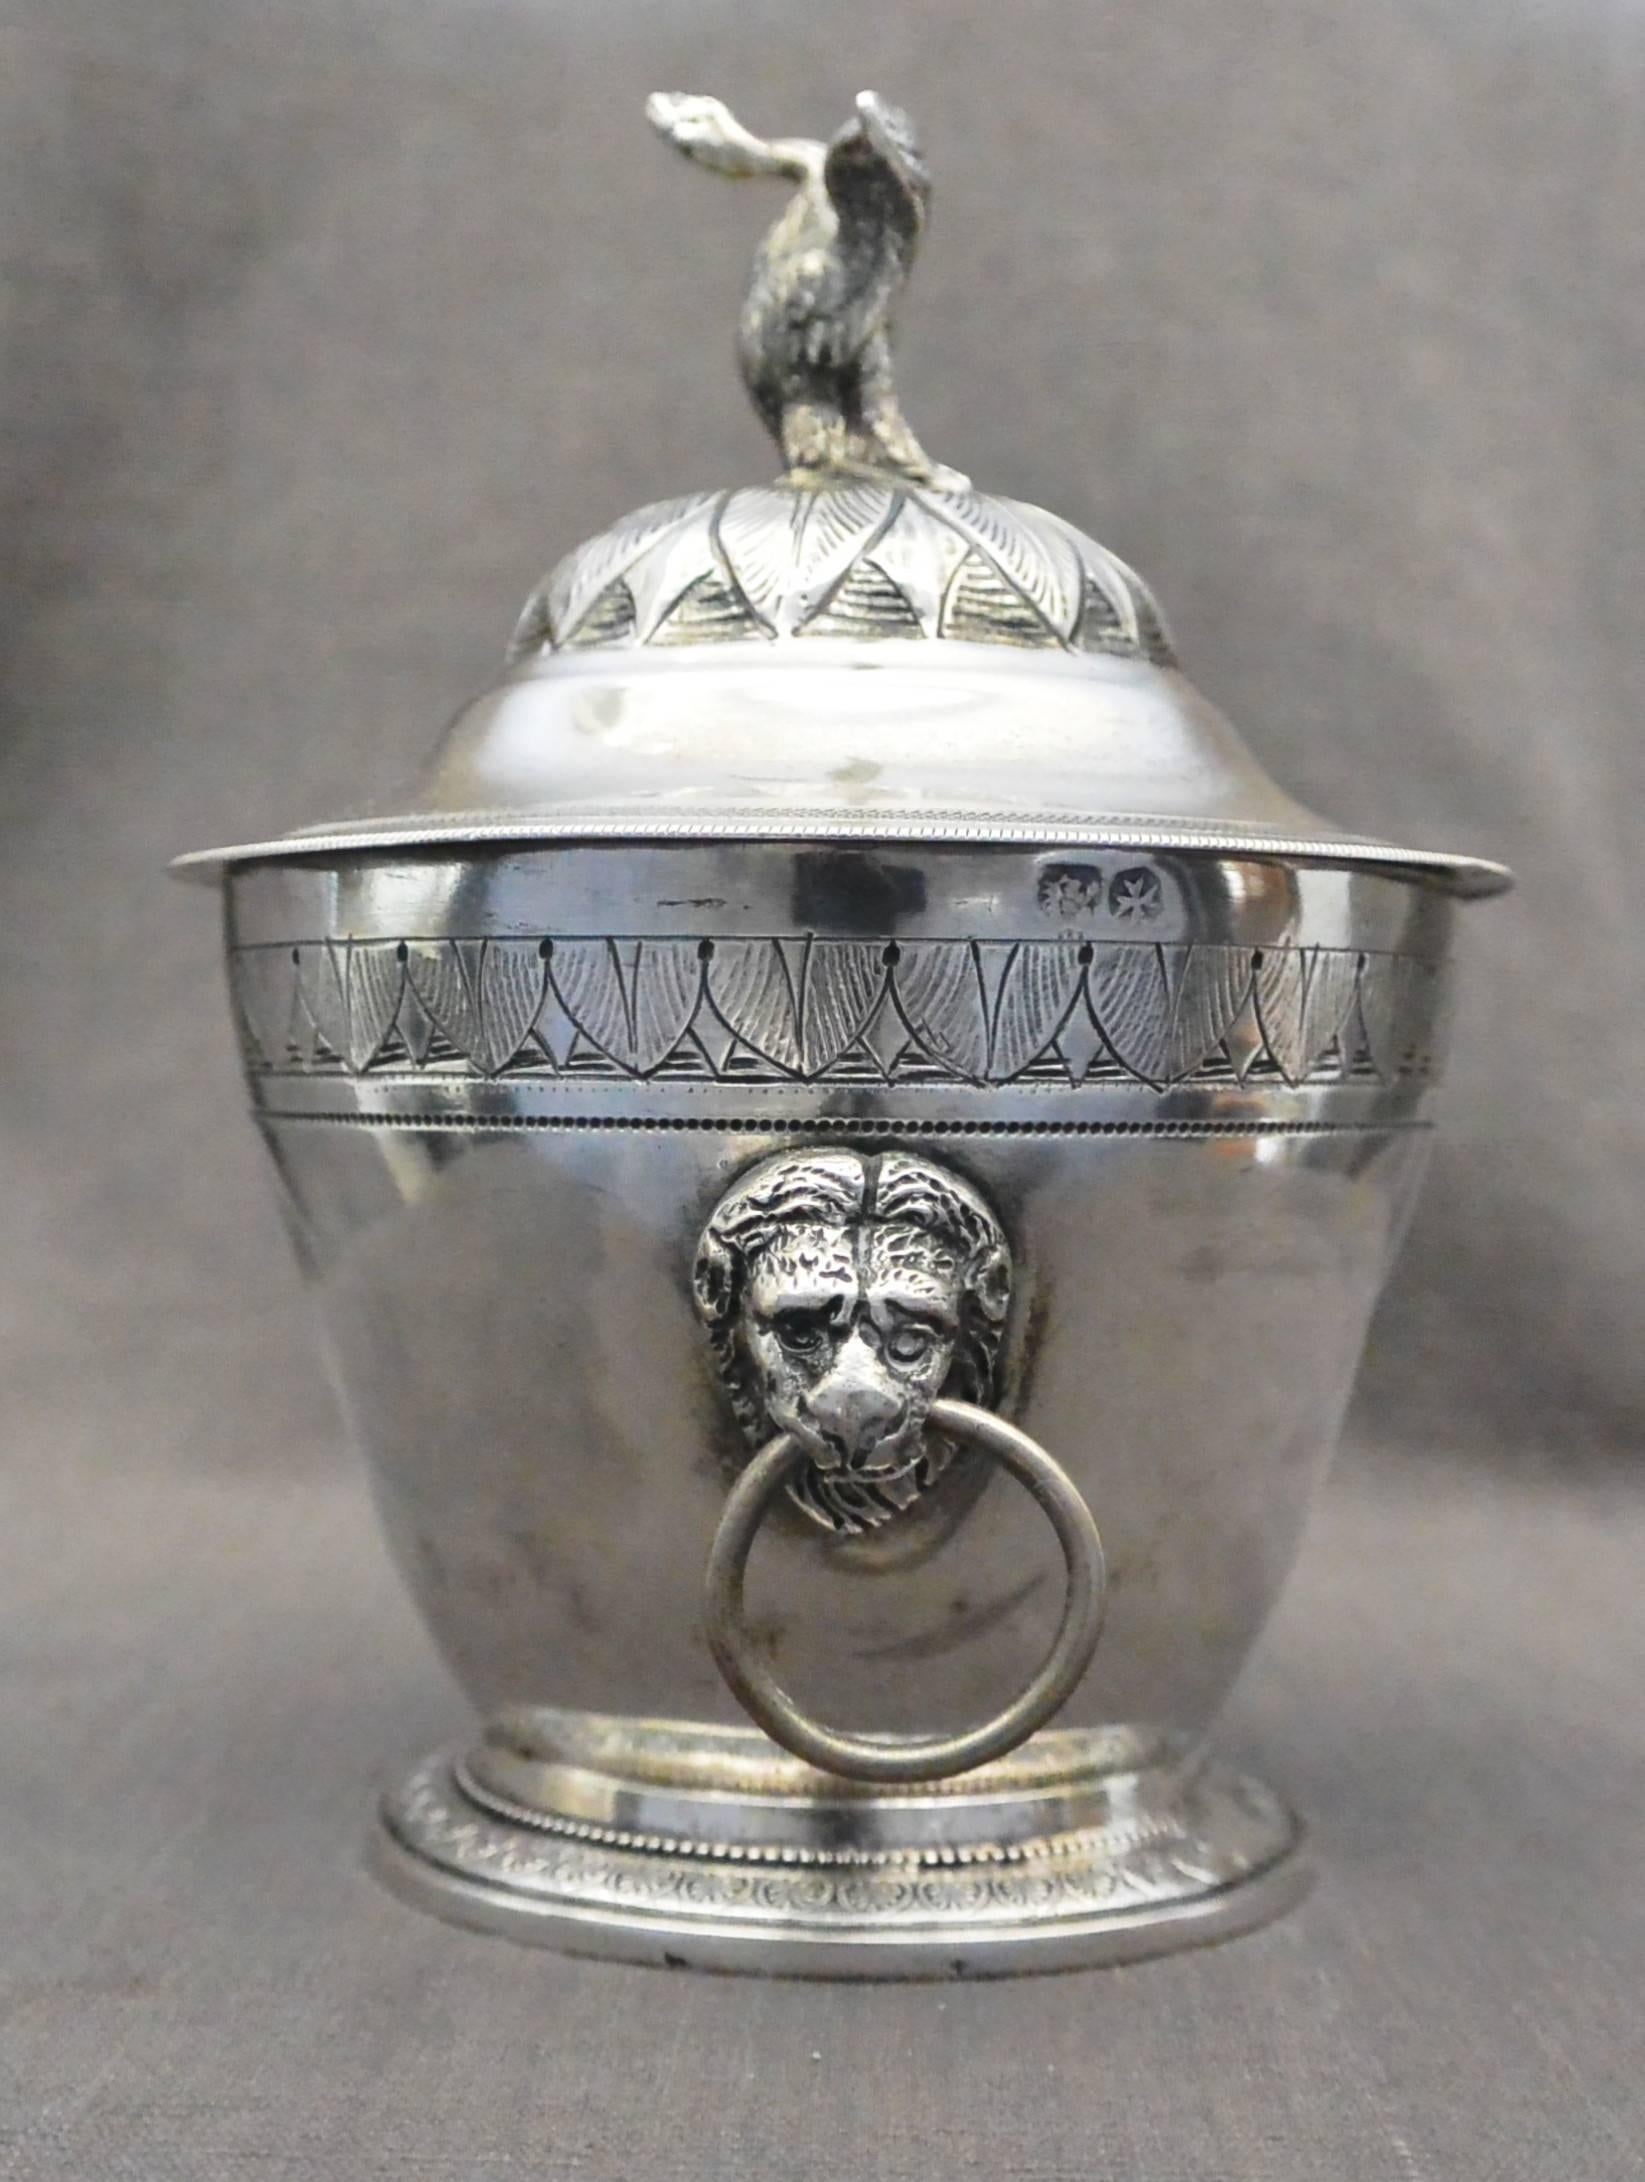 Silver Swan Sugar Bowl. Italian neoclassical sterling silver lidded sugar bowl with swan/goose finial and lion head ring handles. Italian sterling hallmarks. Italy, early 19th century.
Dimension: 3.75